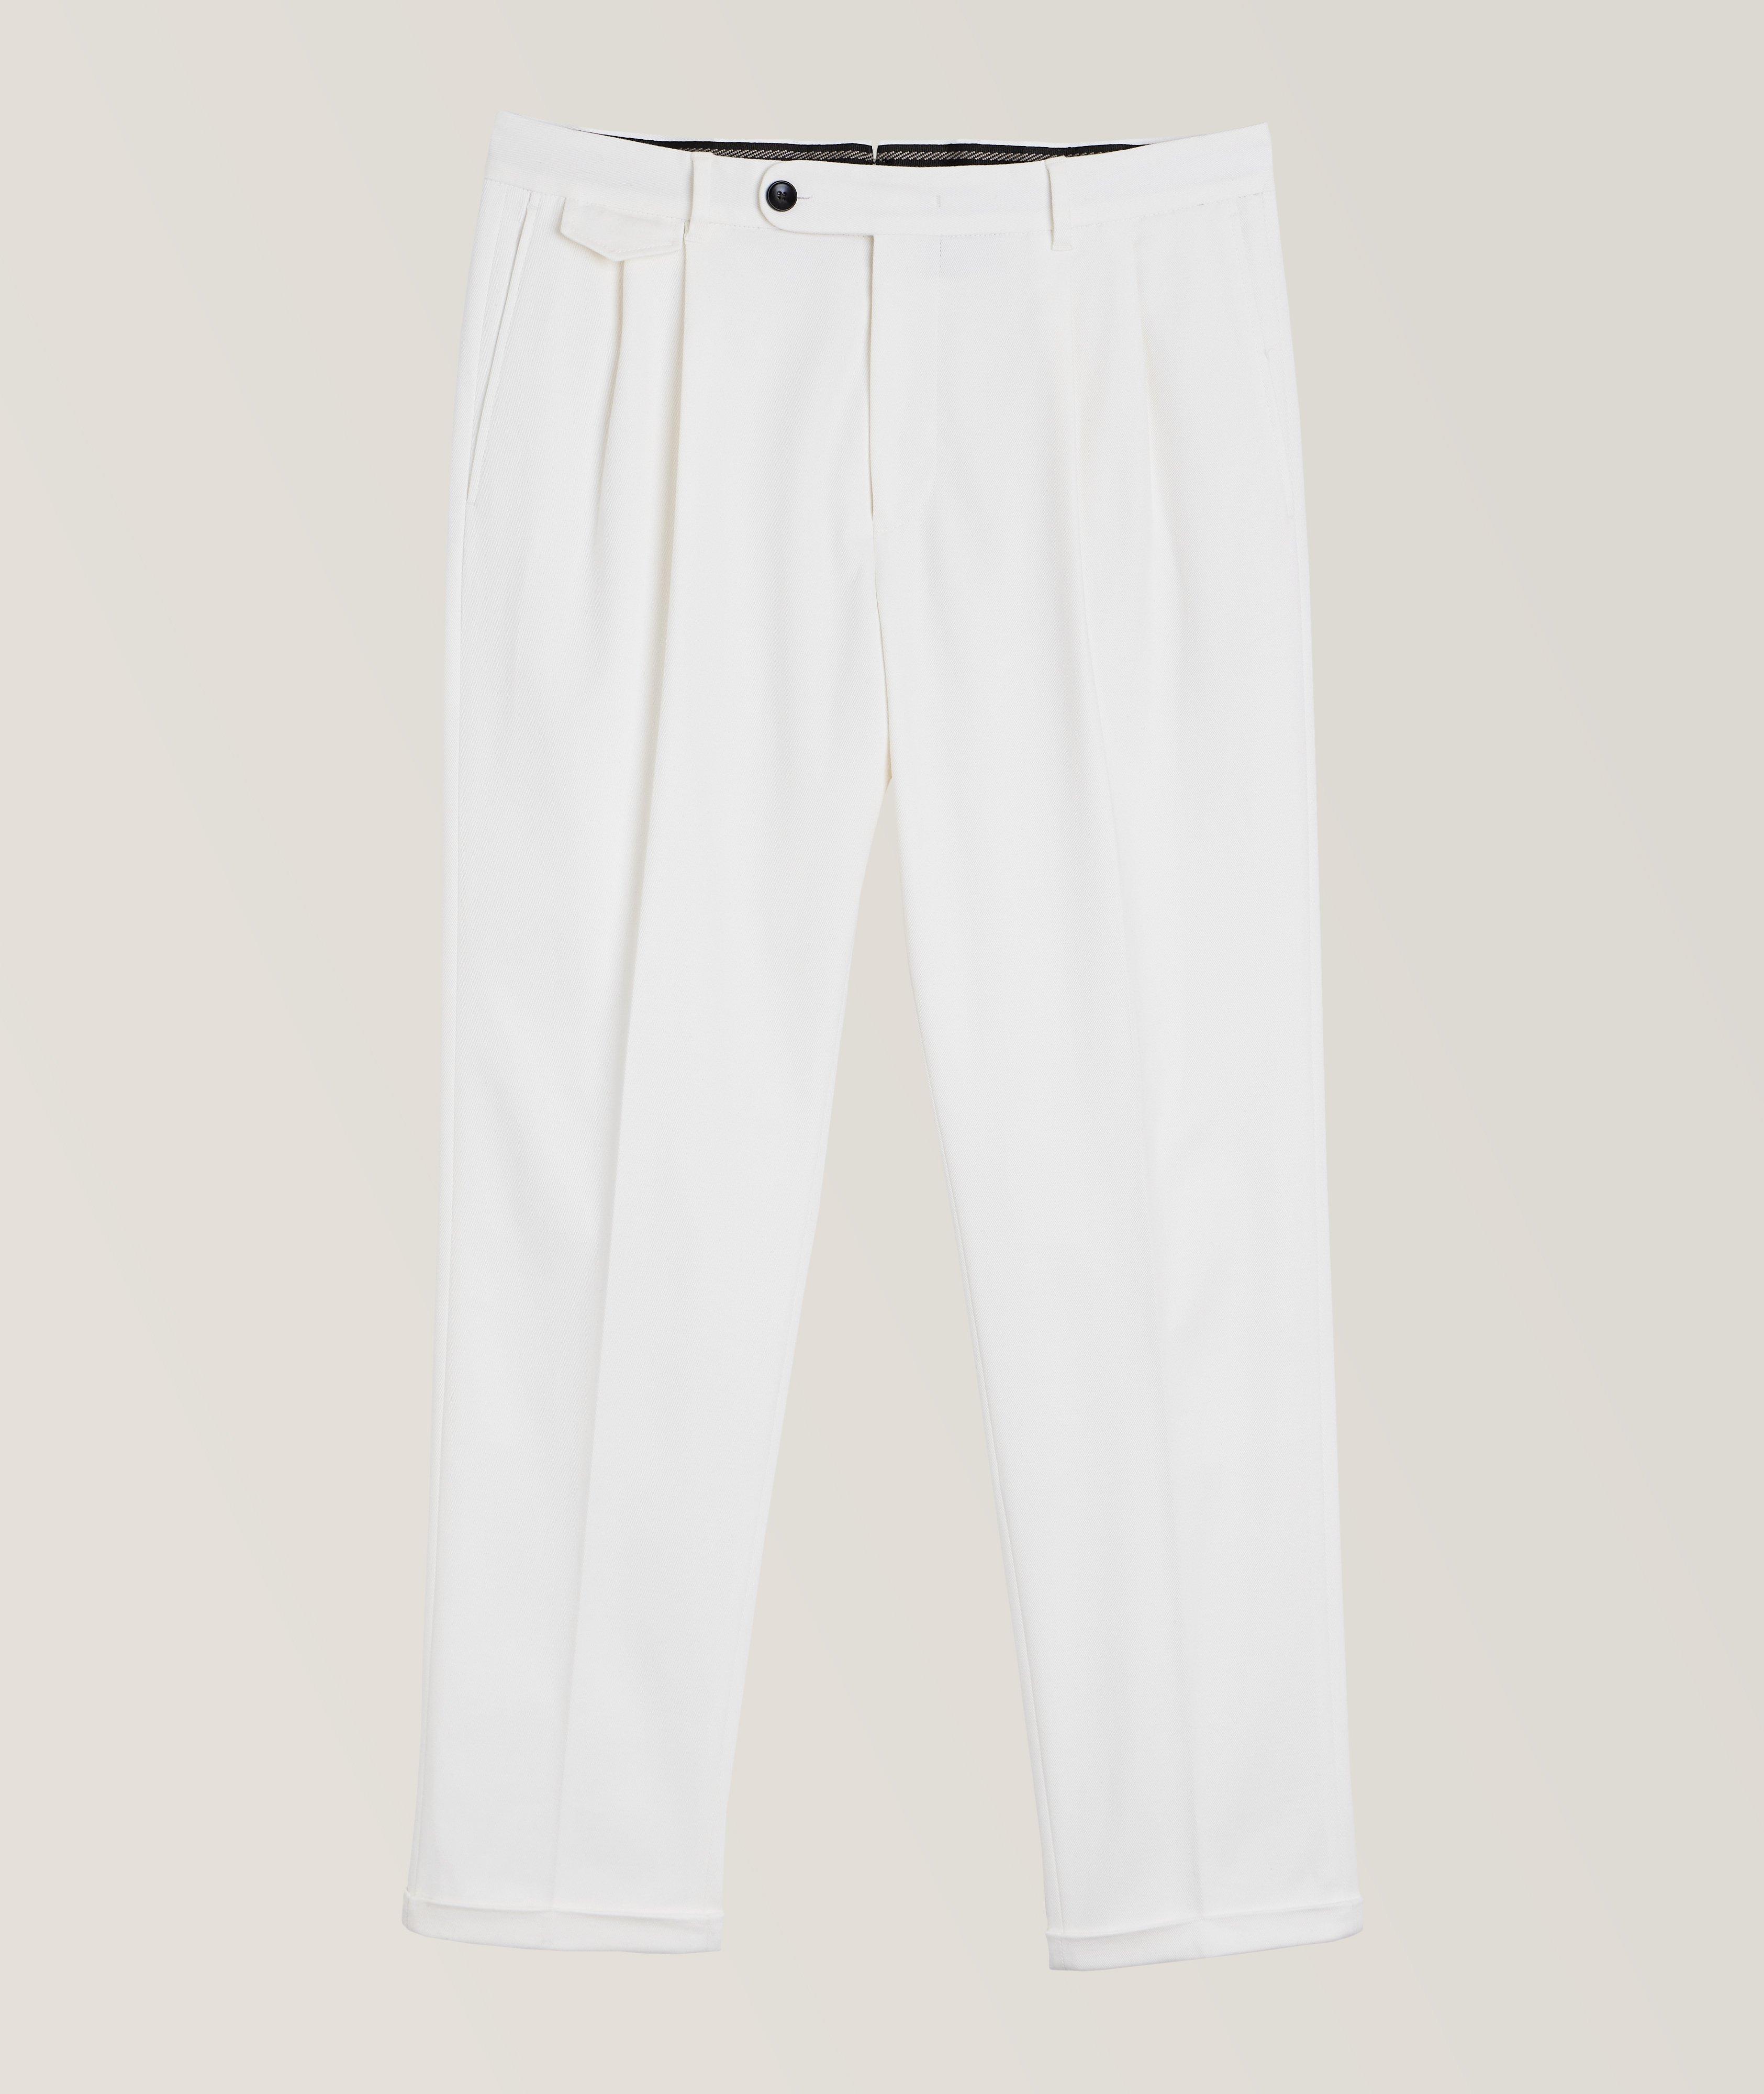 Cotton-Stretch Pleated Pants image 0